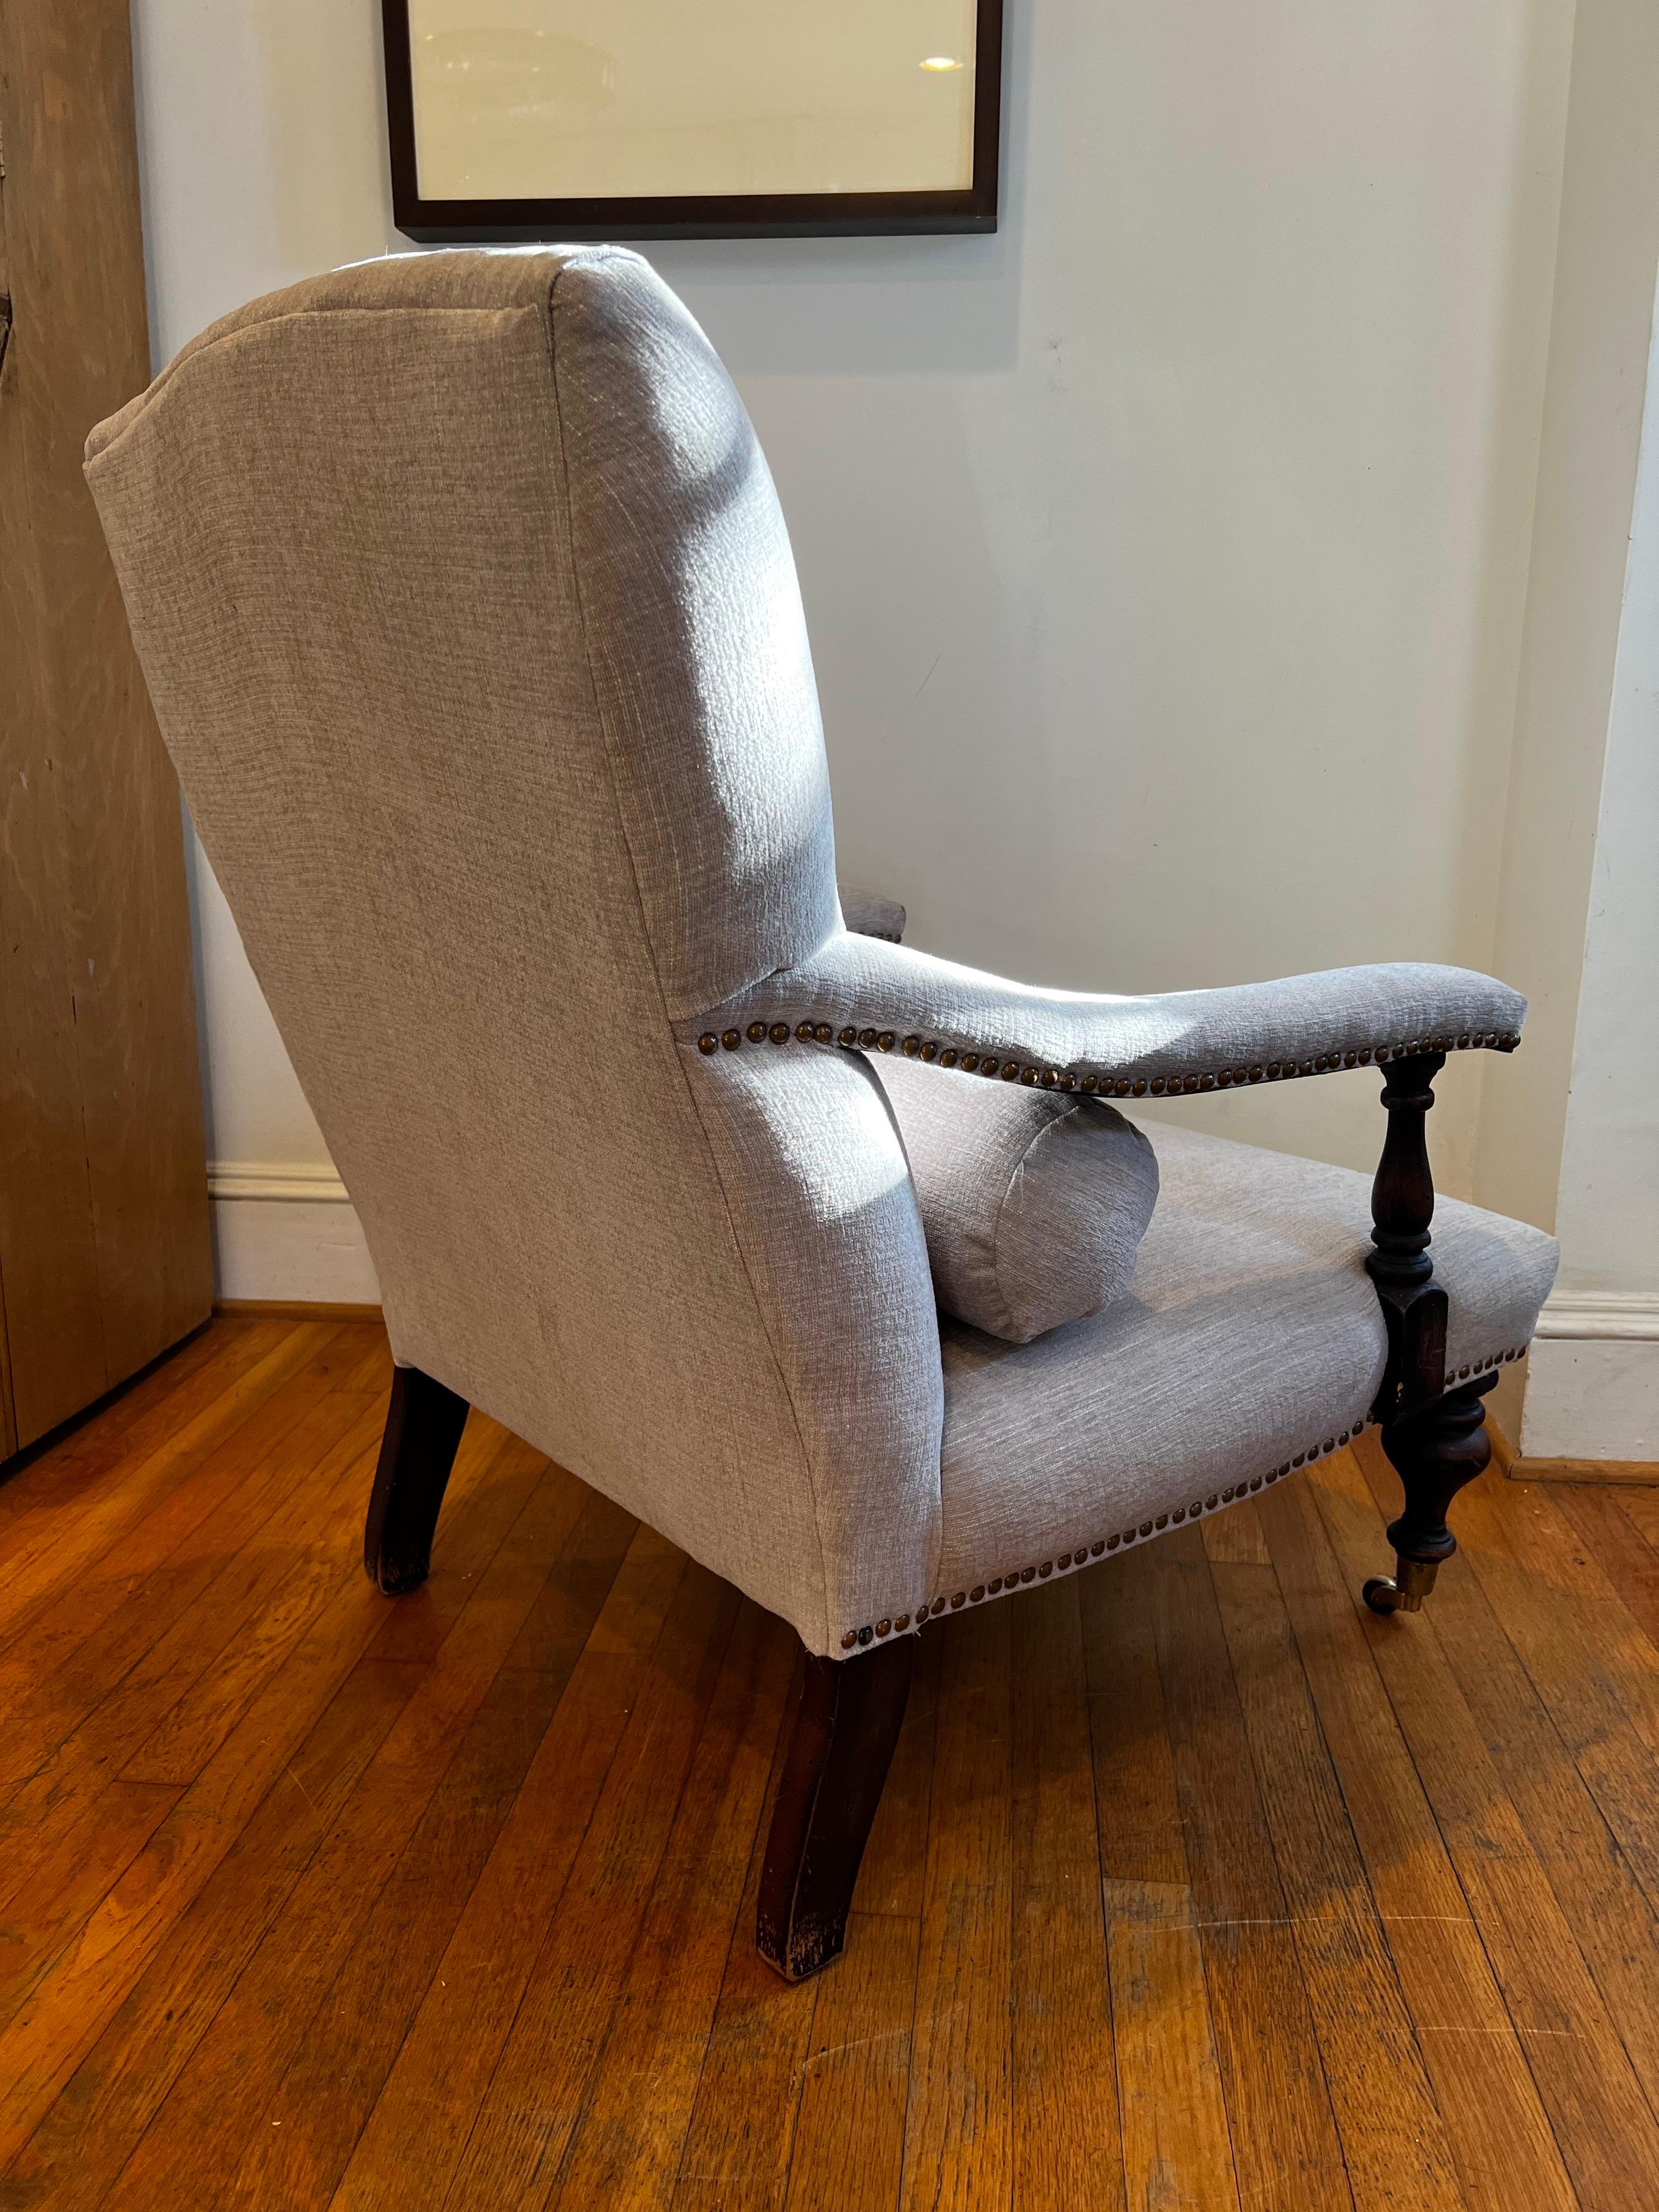 20th Century Vintage Edwardian Style English Library Armchair on Castors with Nailheads